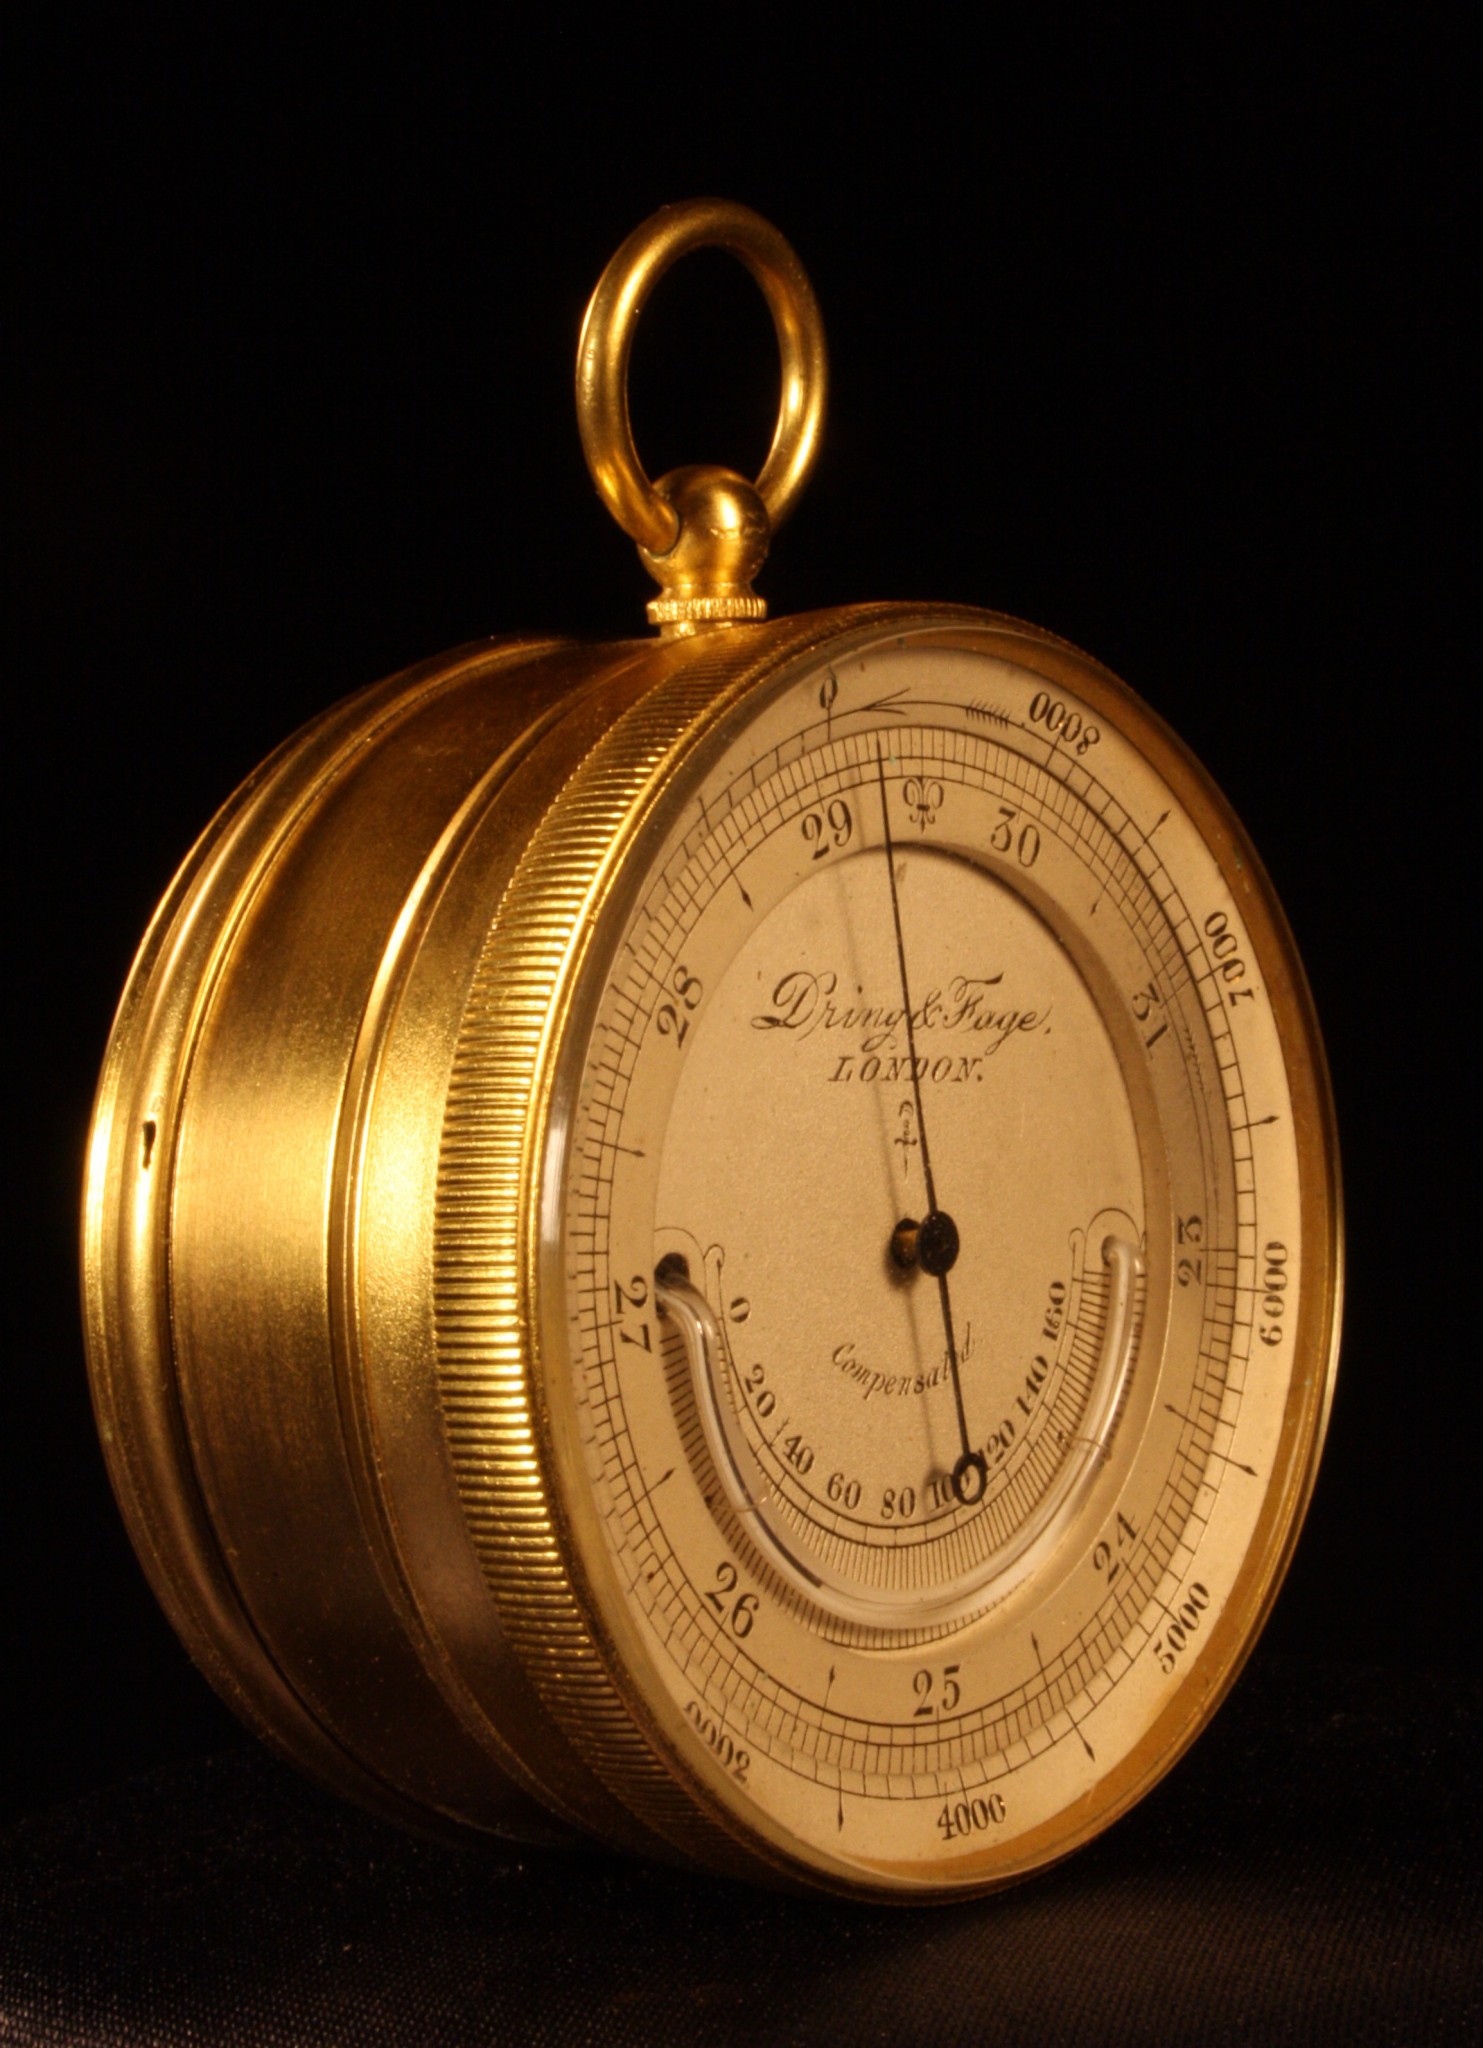 Image of Dring & Fage Altimeter